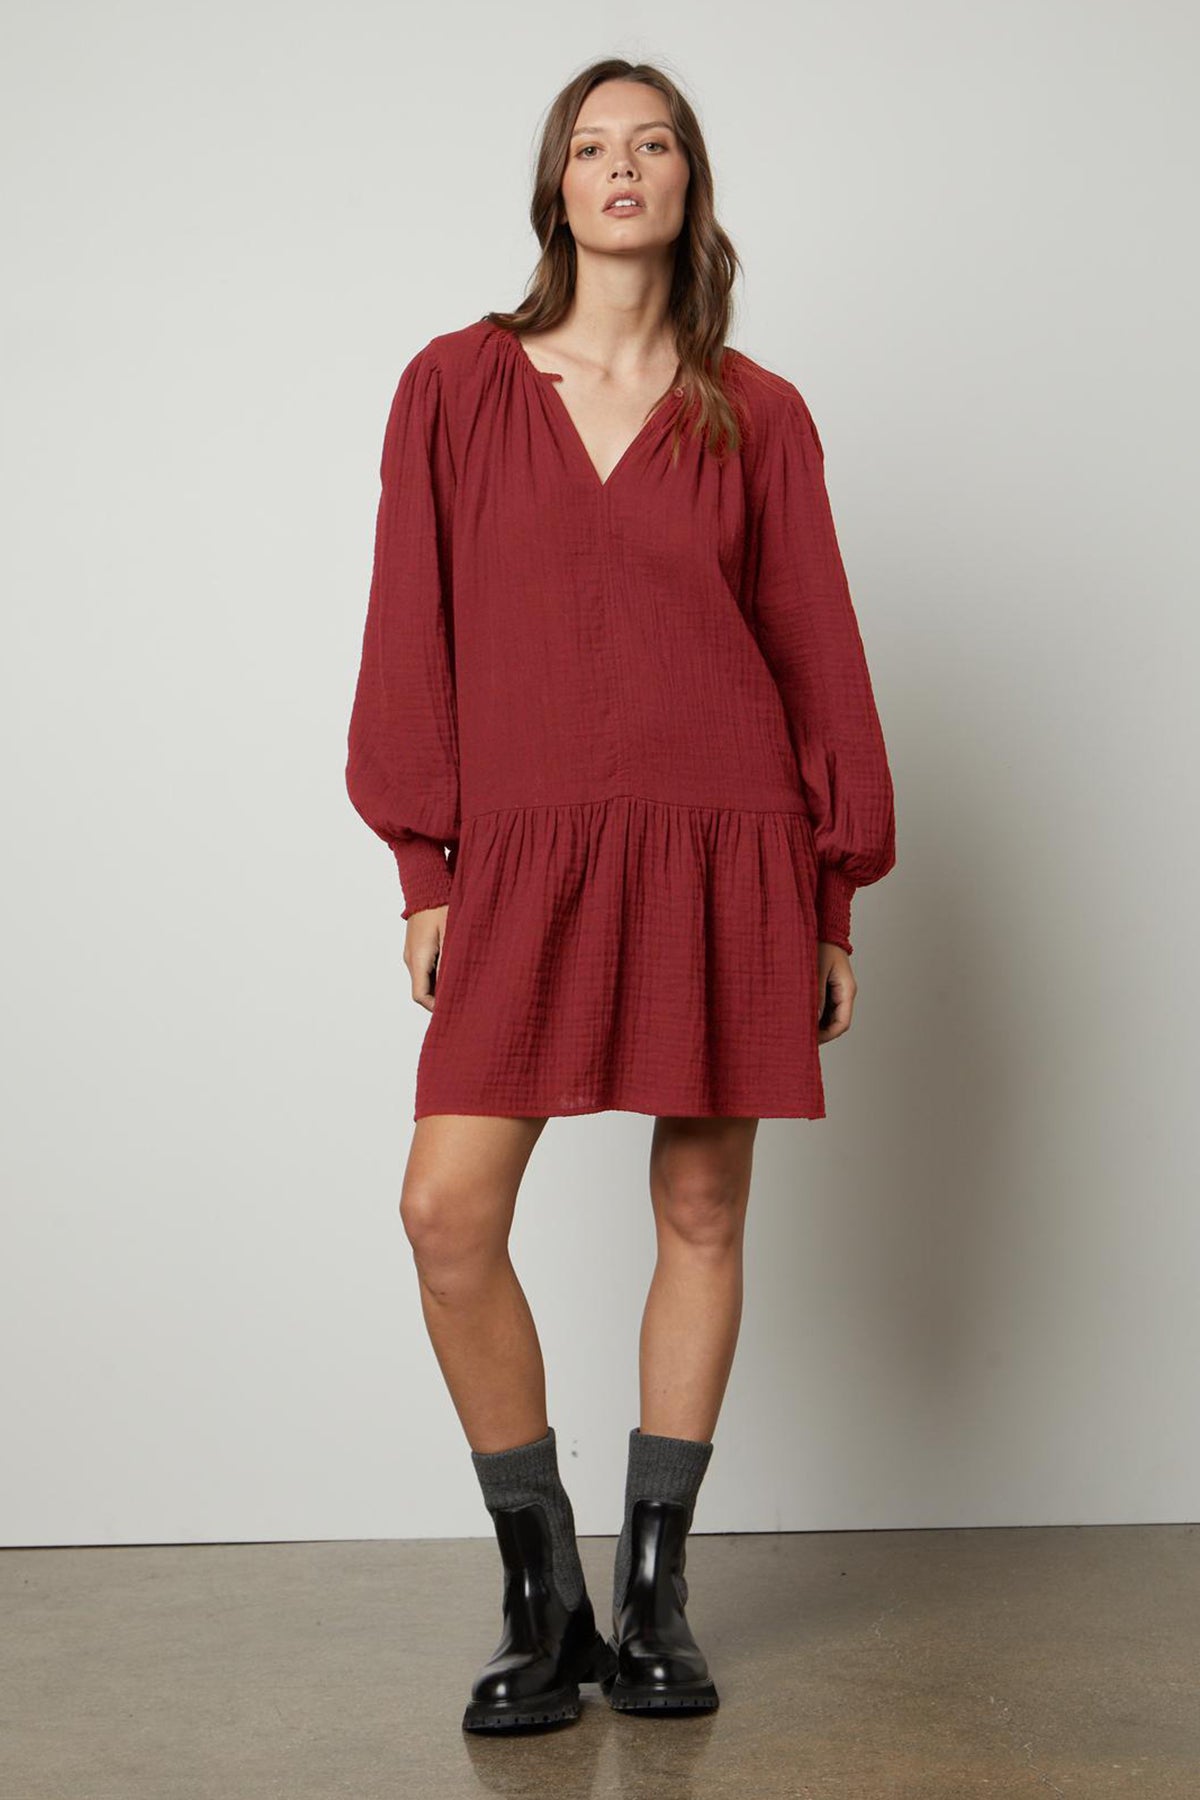   The model is wearing a Velvet by Graham & Spencer VIVIANA COTTON GAUZE DRESS with a v-neckline and long sleeve. 